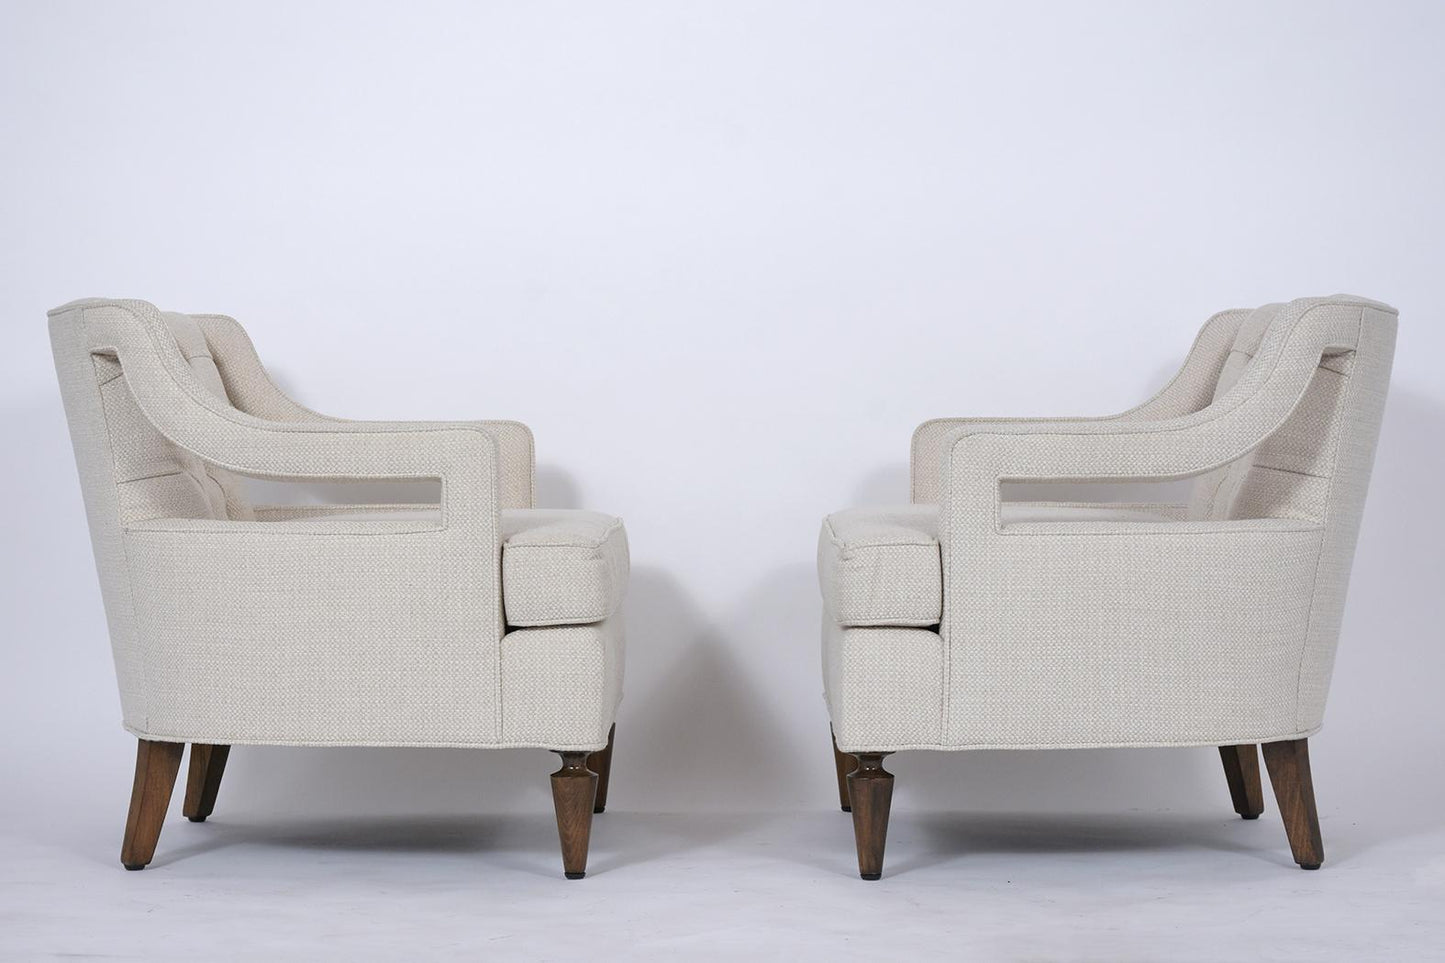 Pair of Mid-Century Modern Upholstery Lounge Chairs